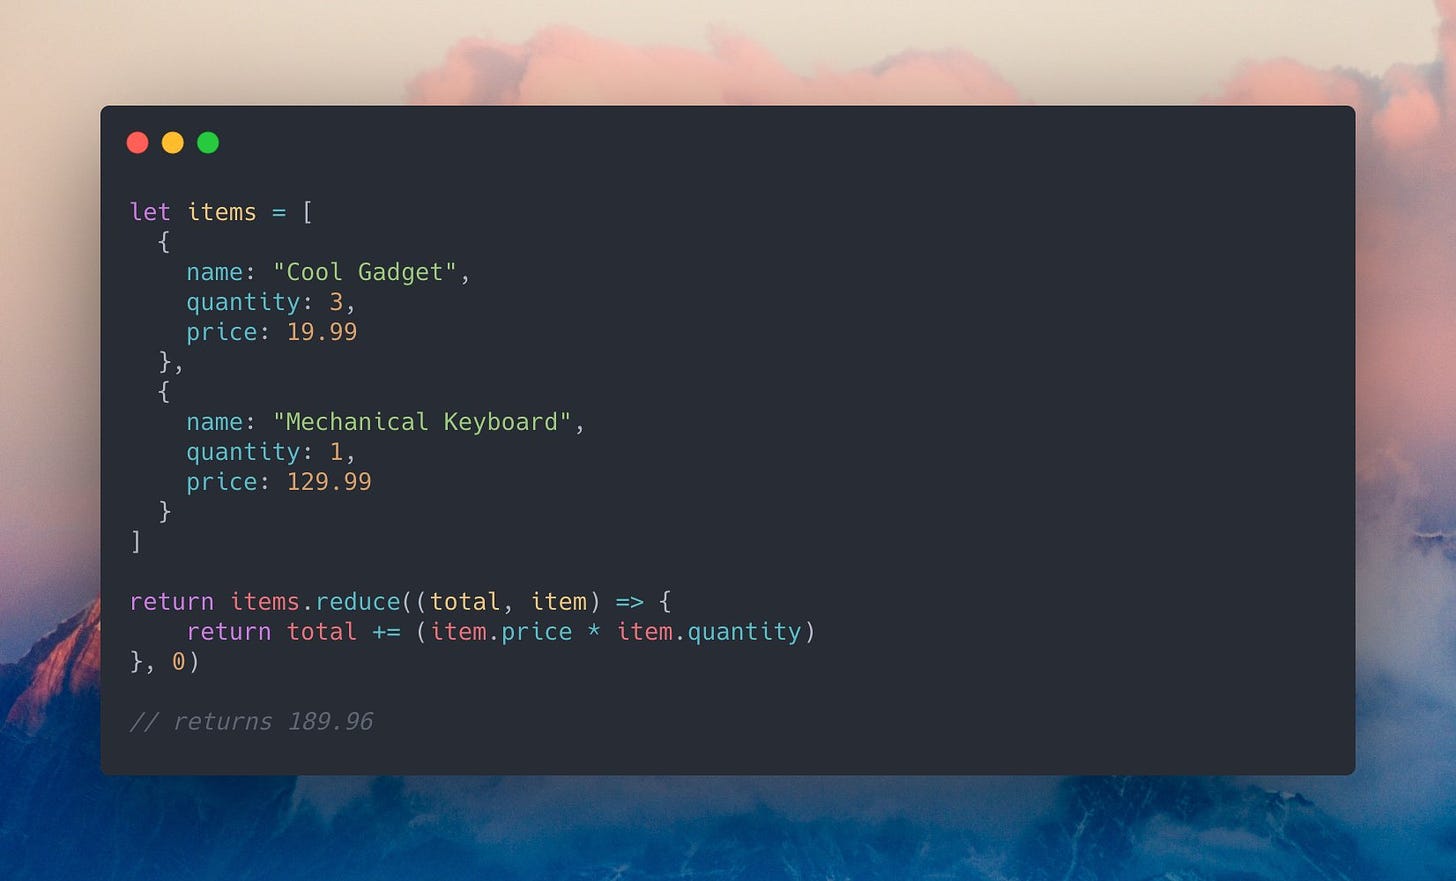 A JavaScript code example that reads: `let items = [{ name: "Cool Gadget", quantity: 3, price: 19.99 },{ name: "Mechanical Keyboard", quantity: 1, price: 129.99 }]; return items.reduce((total, item) => { return total += (item.price * item.quantity) }, 0); // returns 189.96`